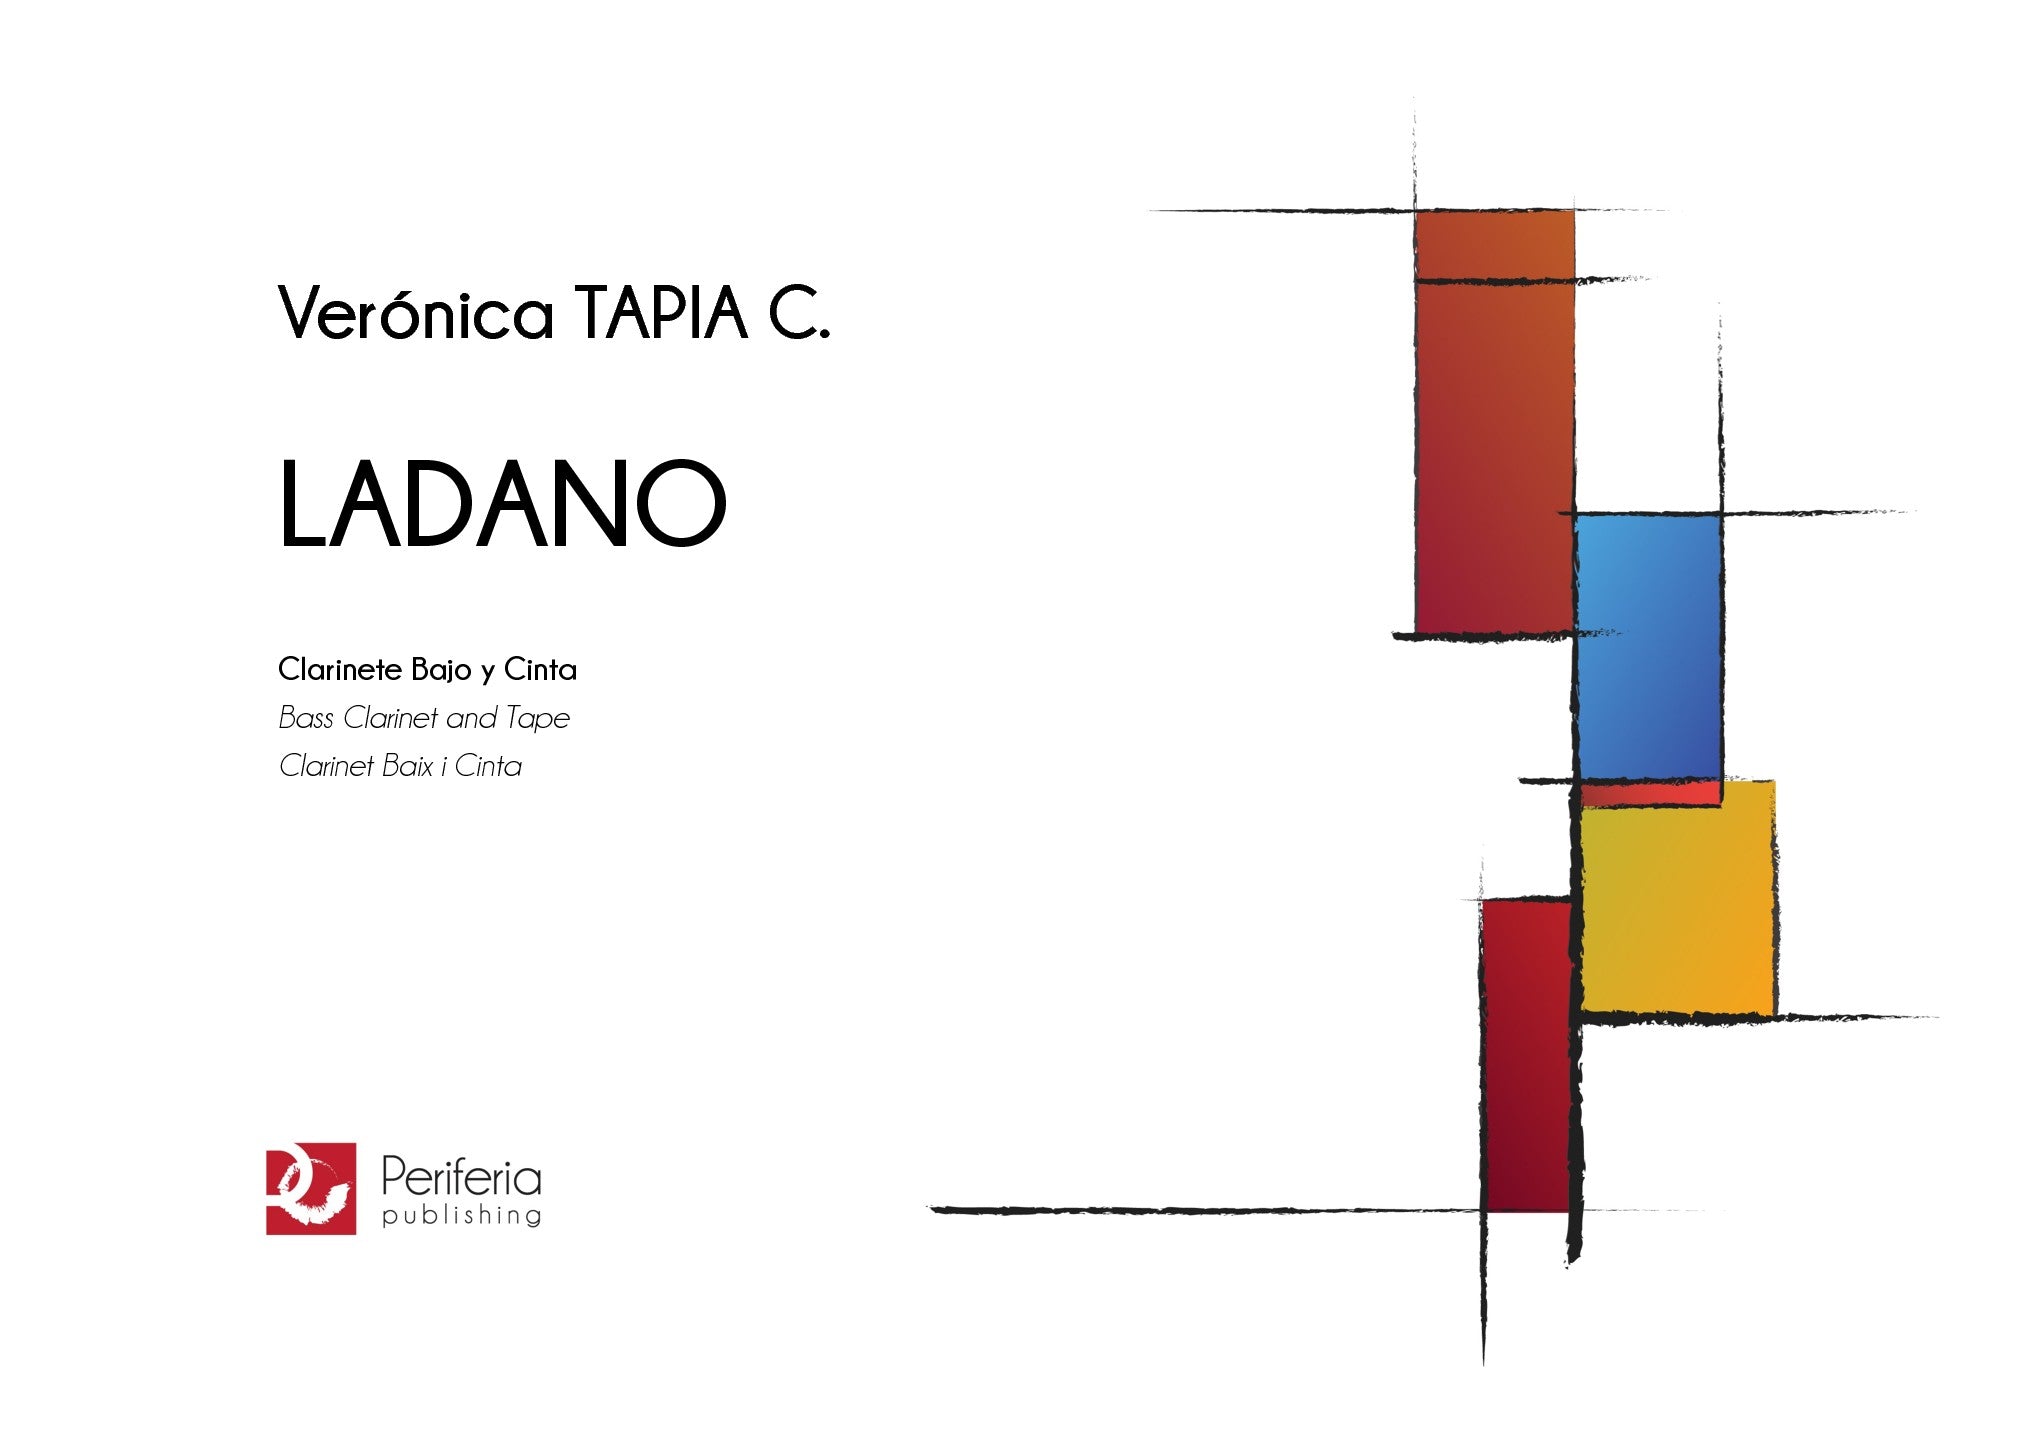 Tapia - Ladano for Bass Clarinet and Tape